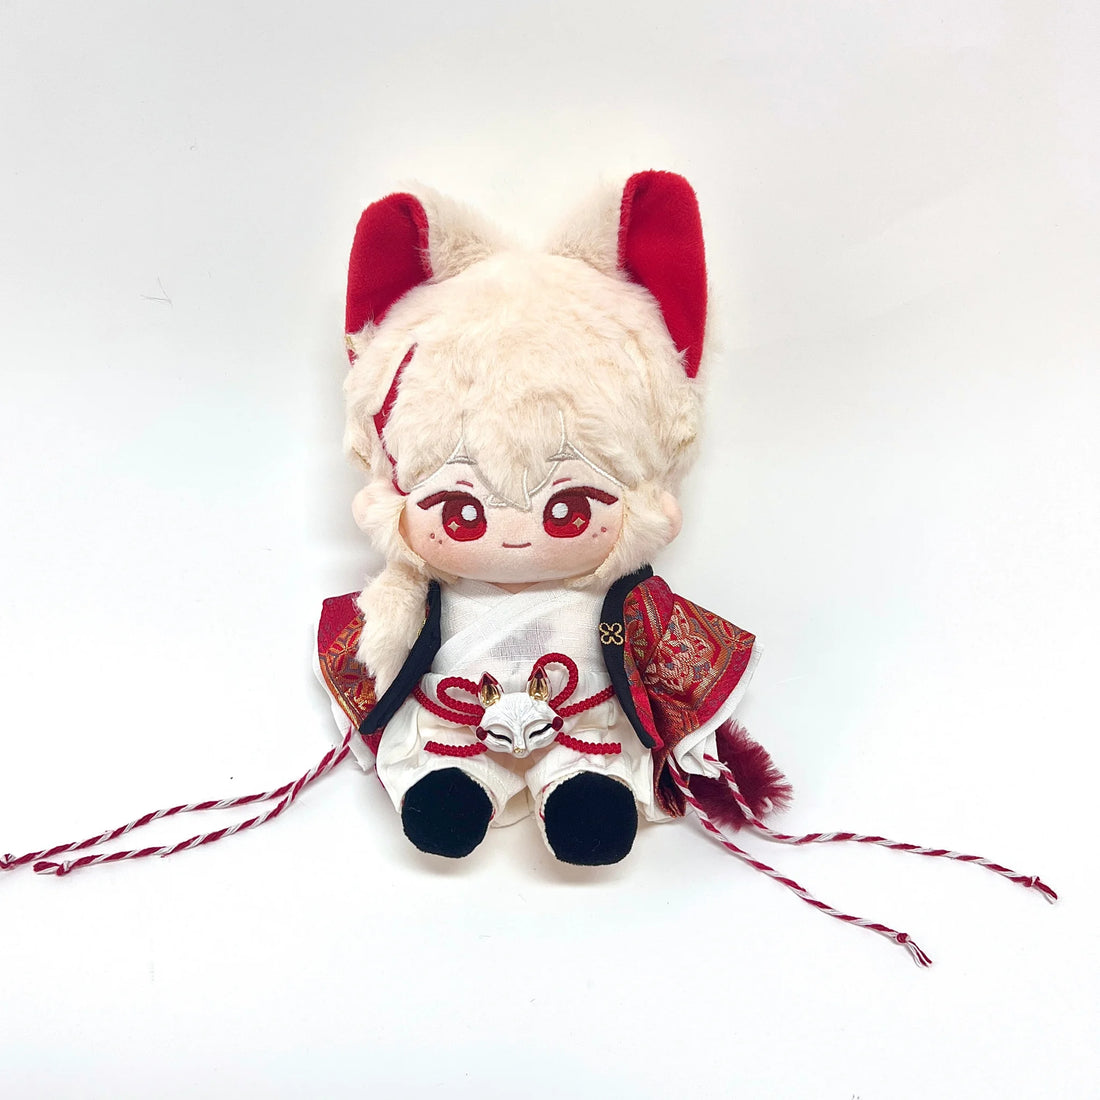 20Cm Genshin Impact Kazuha Plush Cute Doll Outfit Changeable Naked Doll With Bones+Outfit1 玩偶